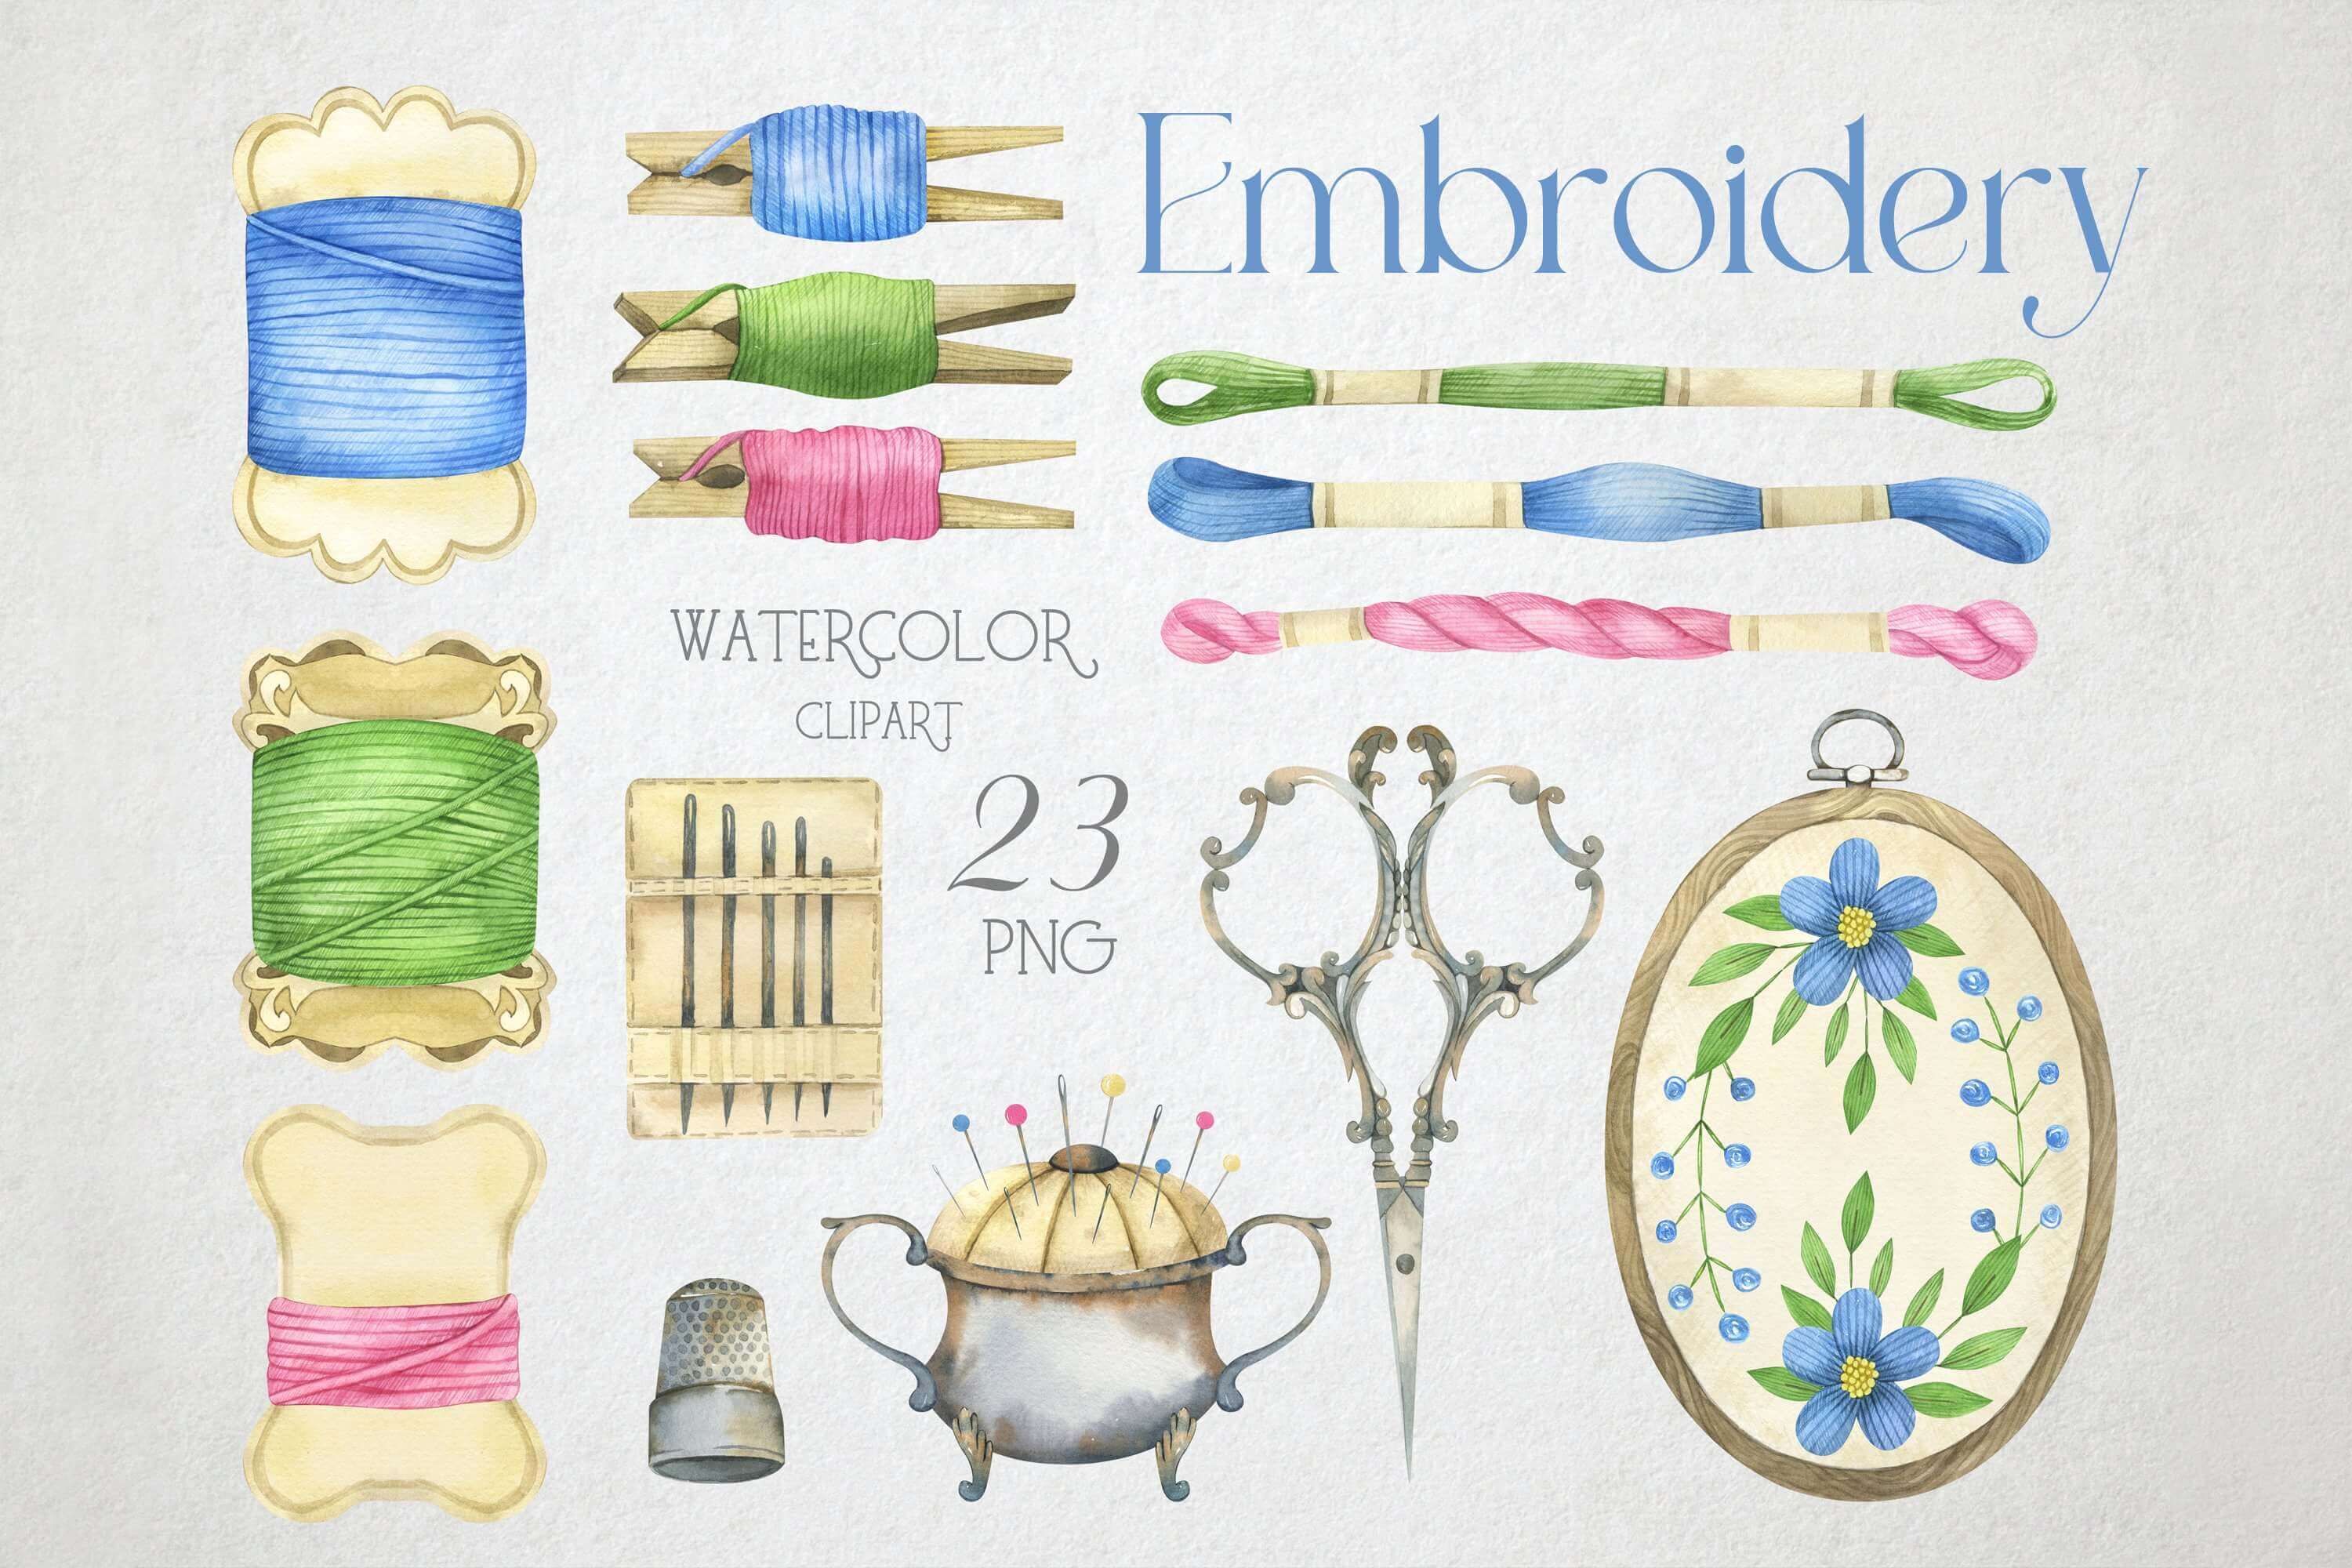 23 watercolor illustration of many spools of thread, scissors, thimble, needles and a needle case.